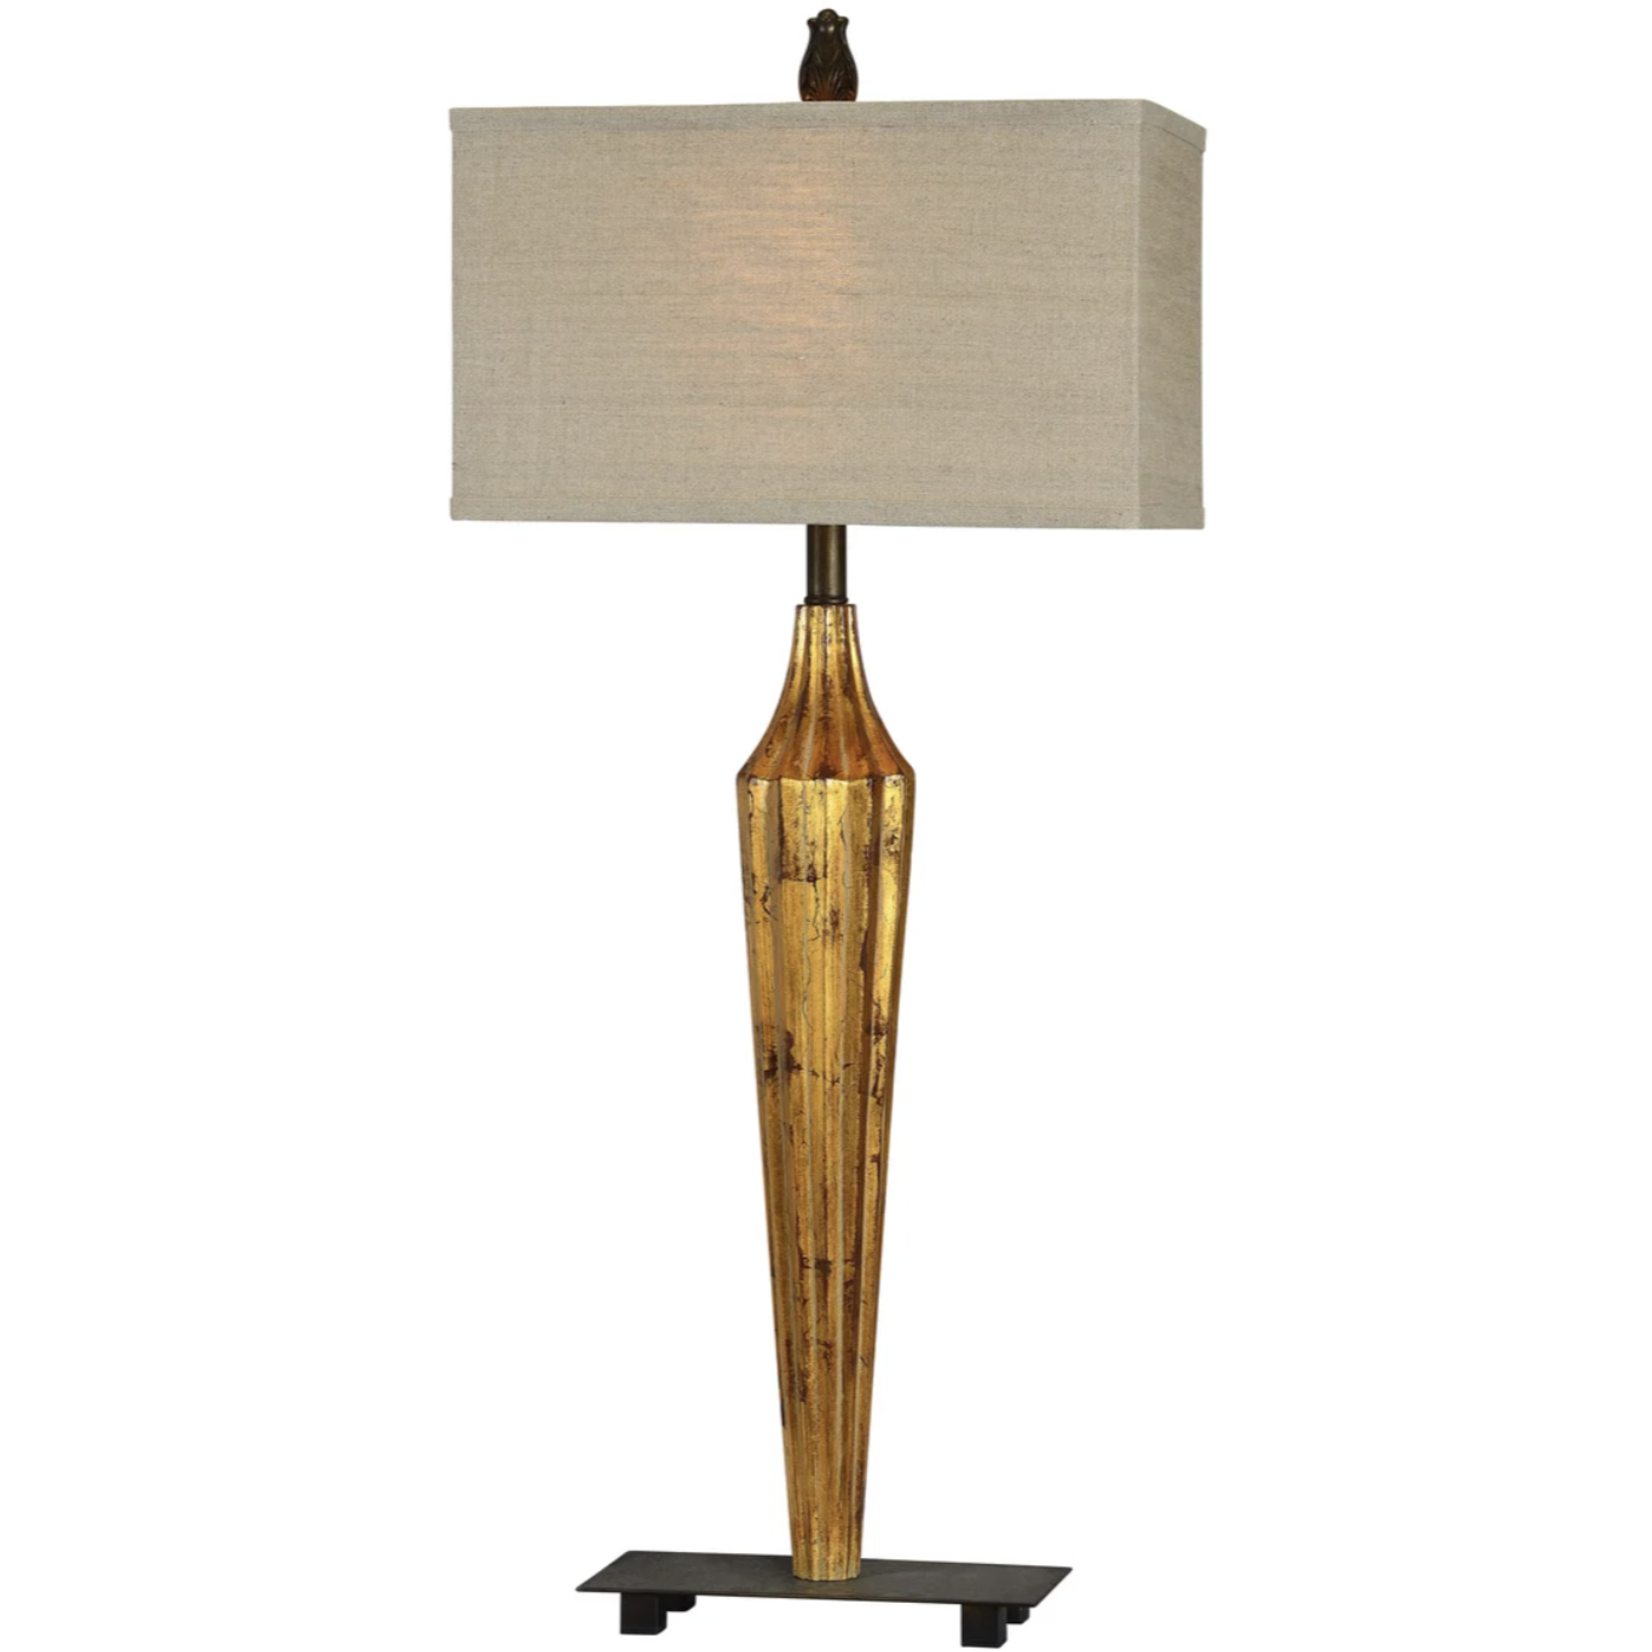 Forty West Slayton Table Lamp